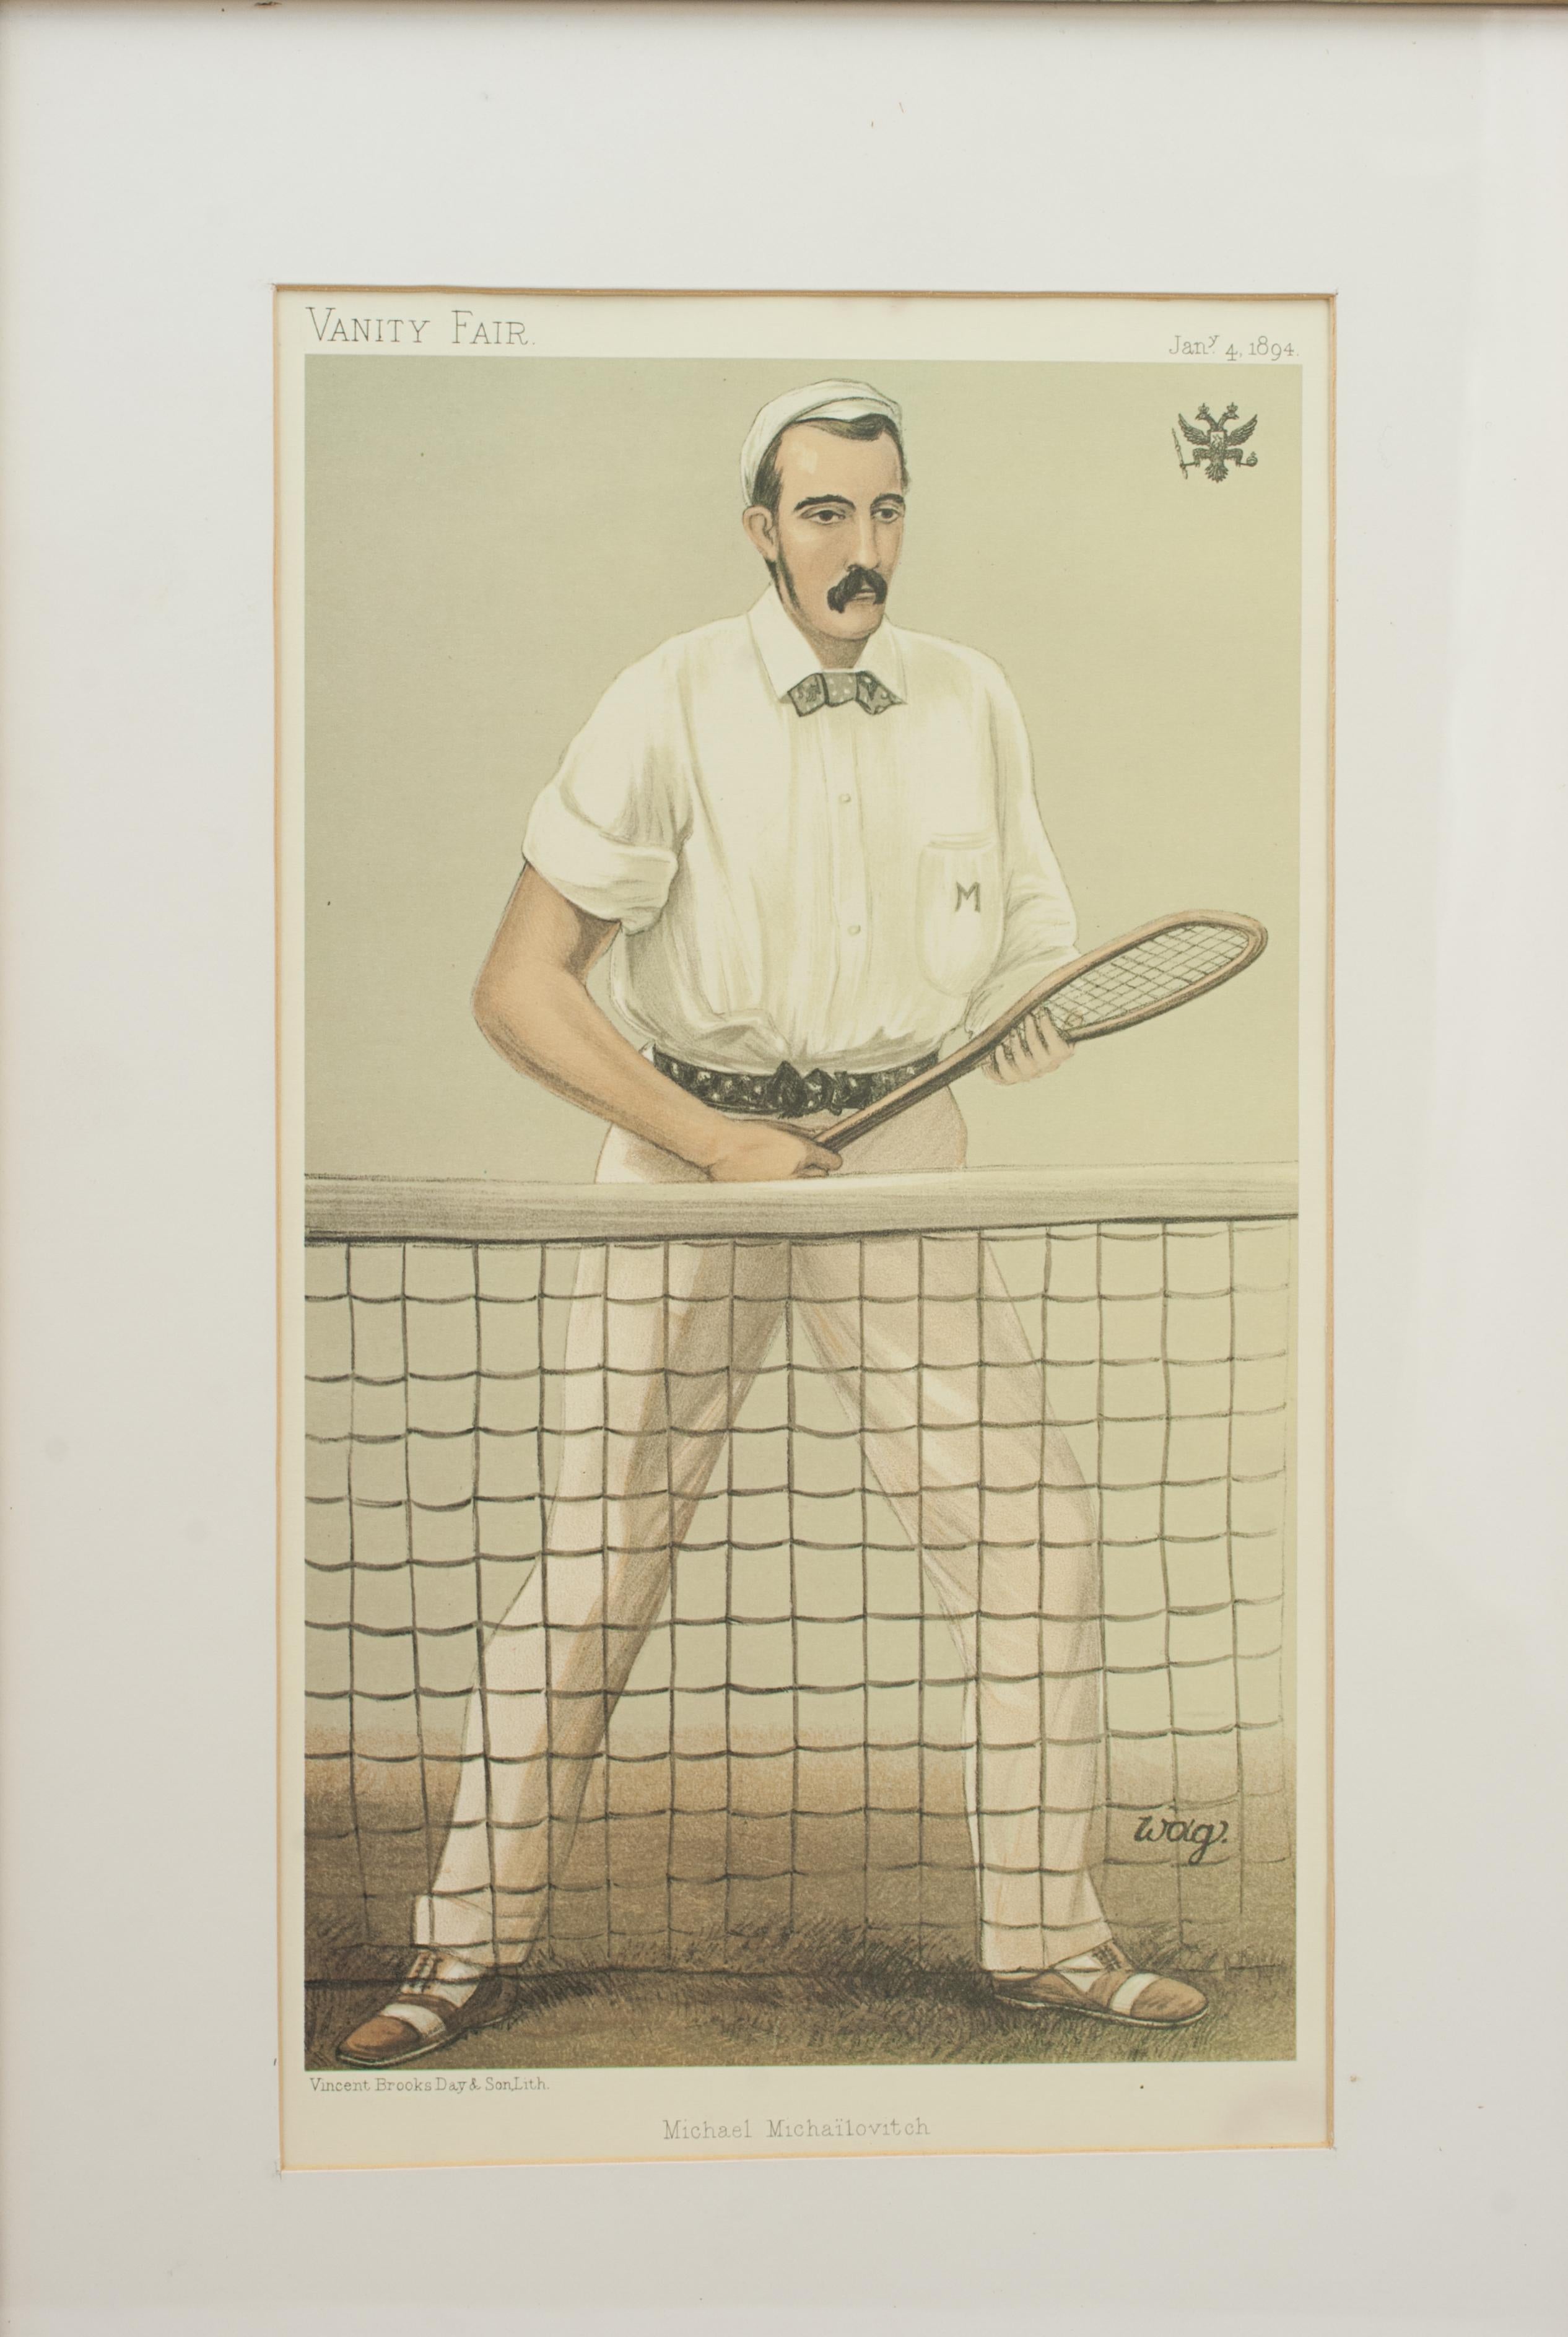 English Vintage Tennis Vanity Fair Print of Michailovitch Of Russia For Sale